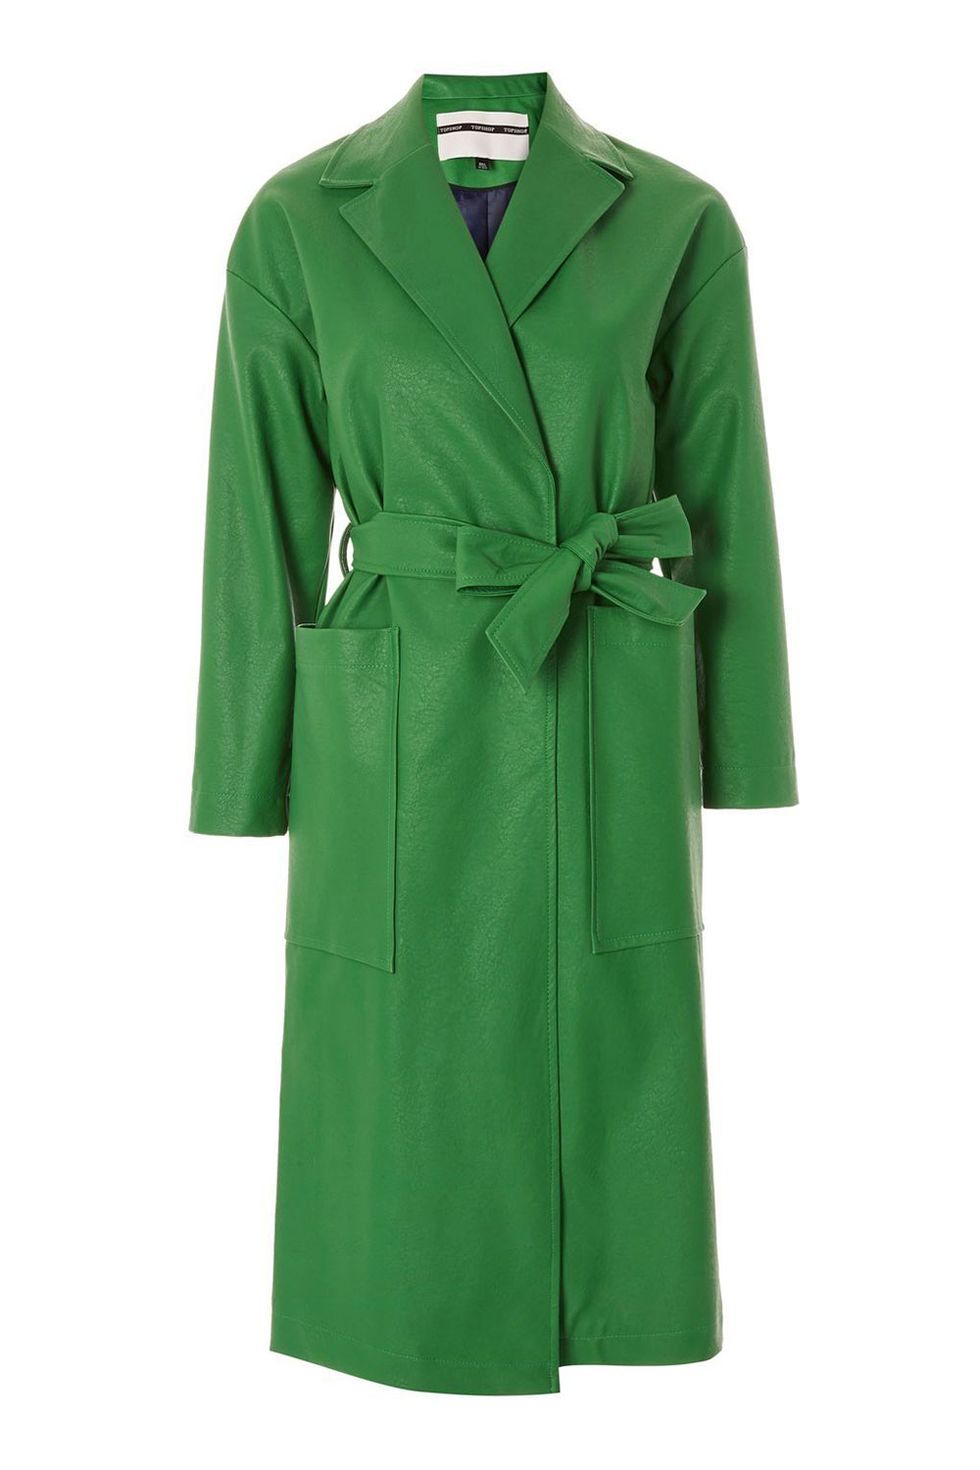 Clothing, Green, Coat, Trench coat, Overcoat, Robe, Outerwear, Sleeve, Dress, Duster, 